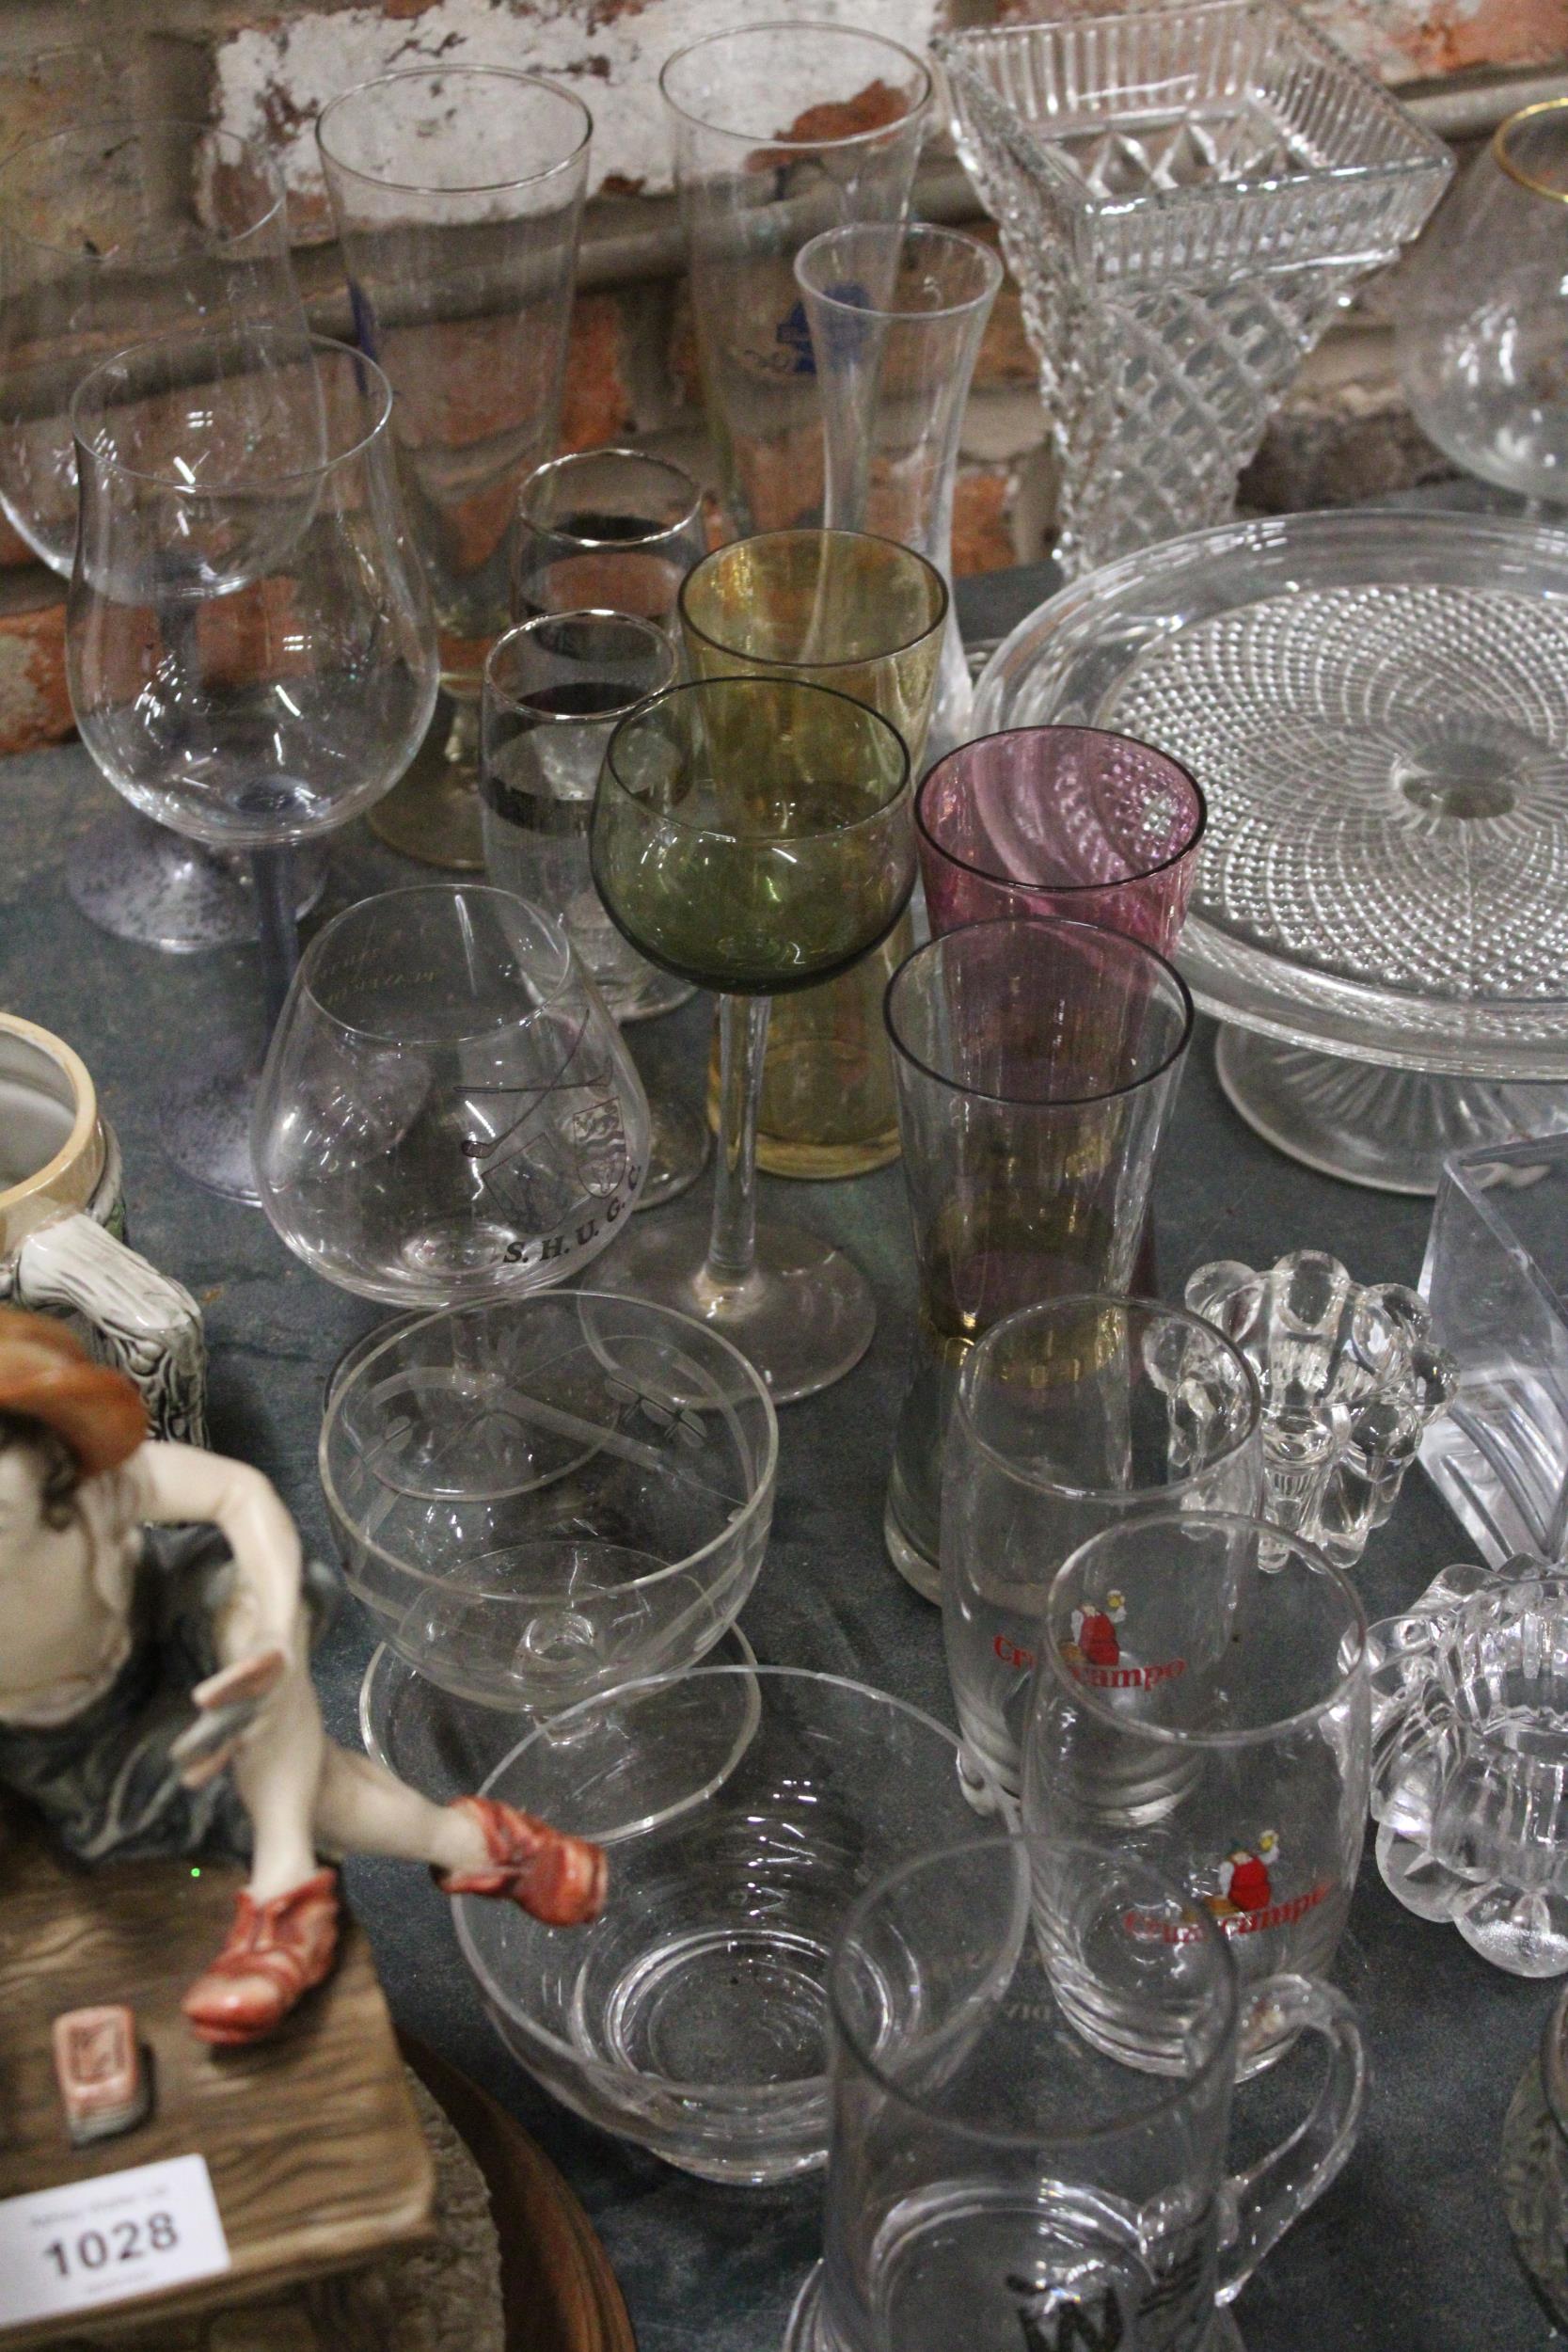 A LARGE COLLECTION OF GLASSWARE TO INCLUDE CRYSTAL BRANDY BALLOONS, FOOTED CAKE STAND, VASE, ROSE - Image 2 of 6